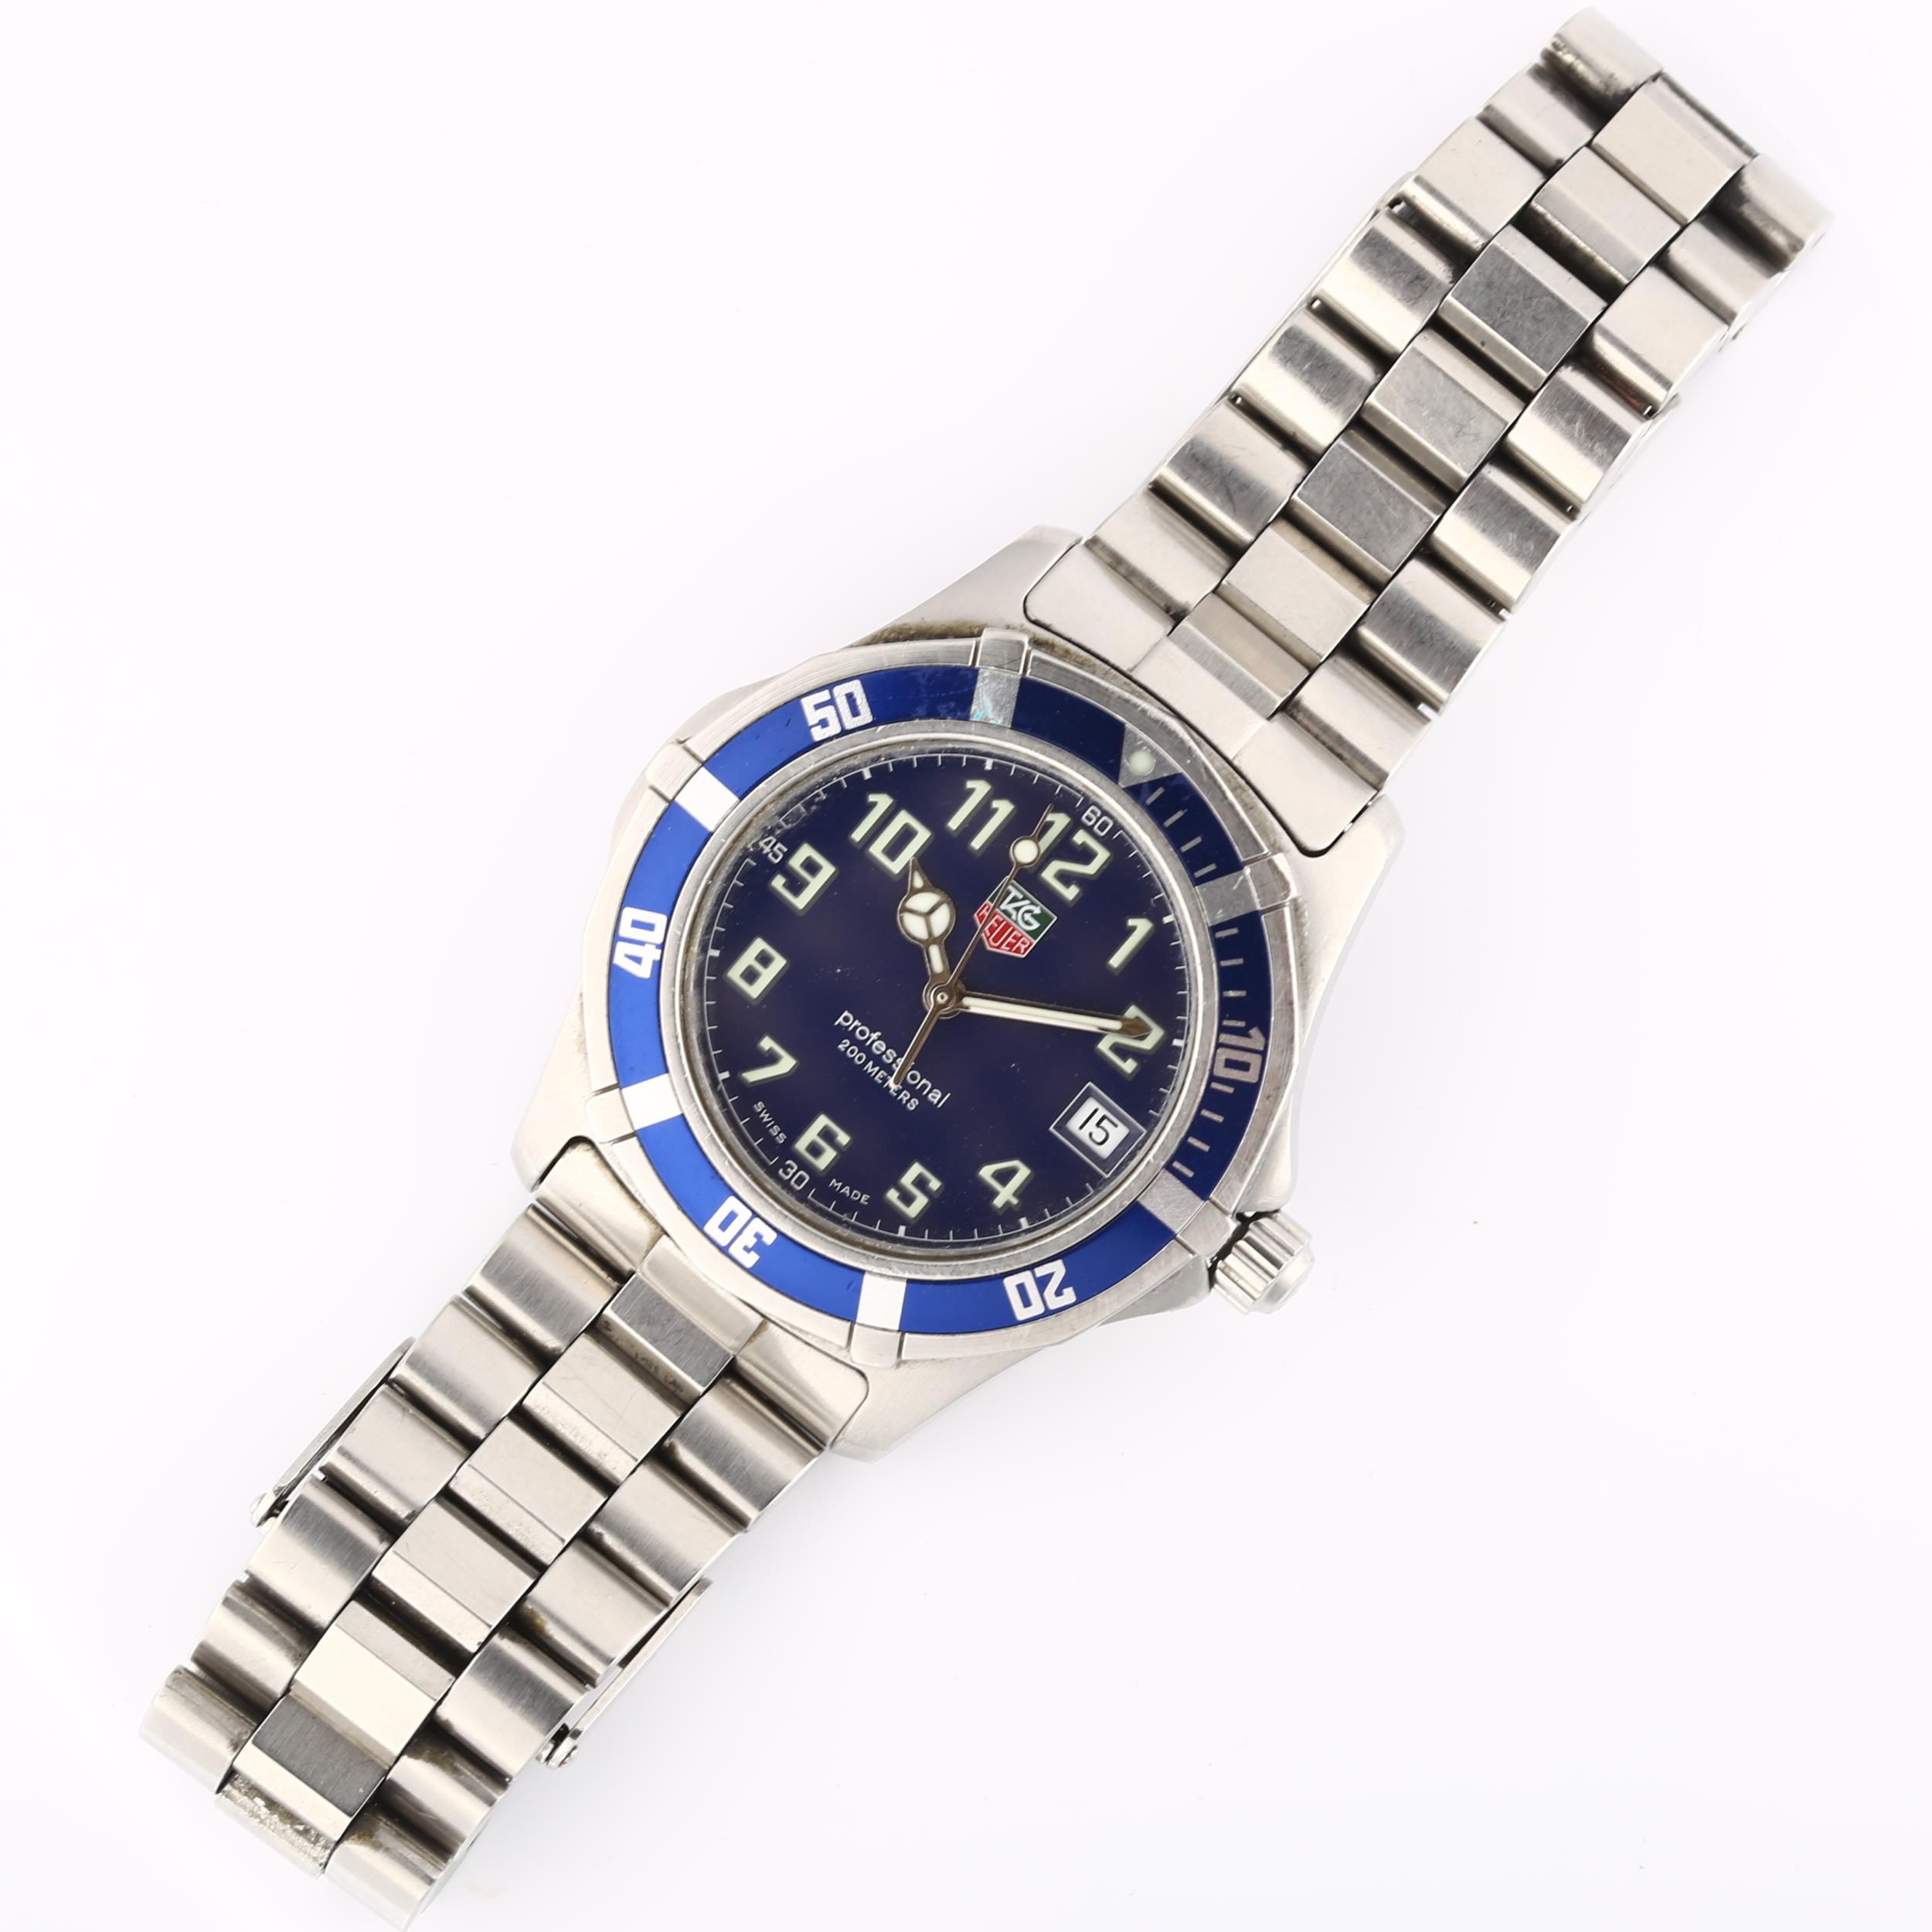 TAG HEUER - a stainless steel 2000 Series Professional quartz bracelet watch, ref. WM1113, blue dial - Image 2 of 5